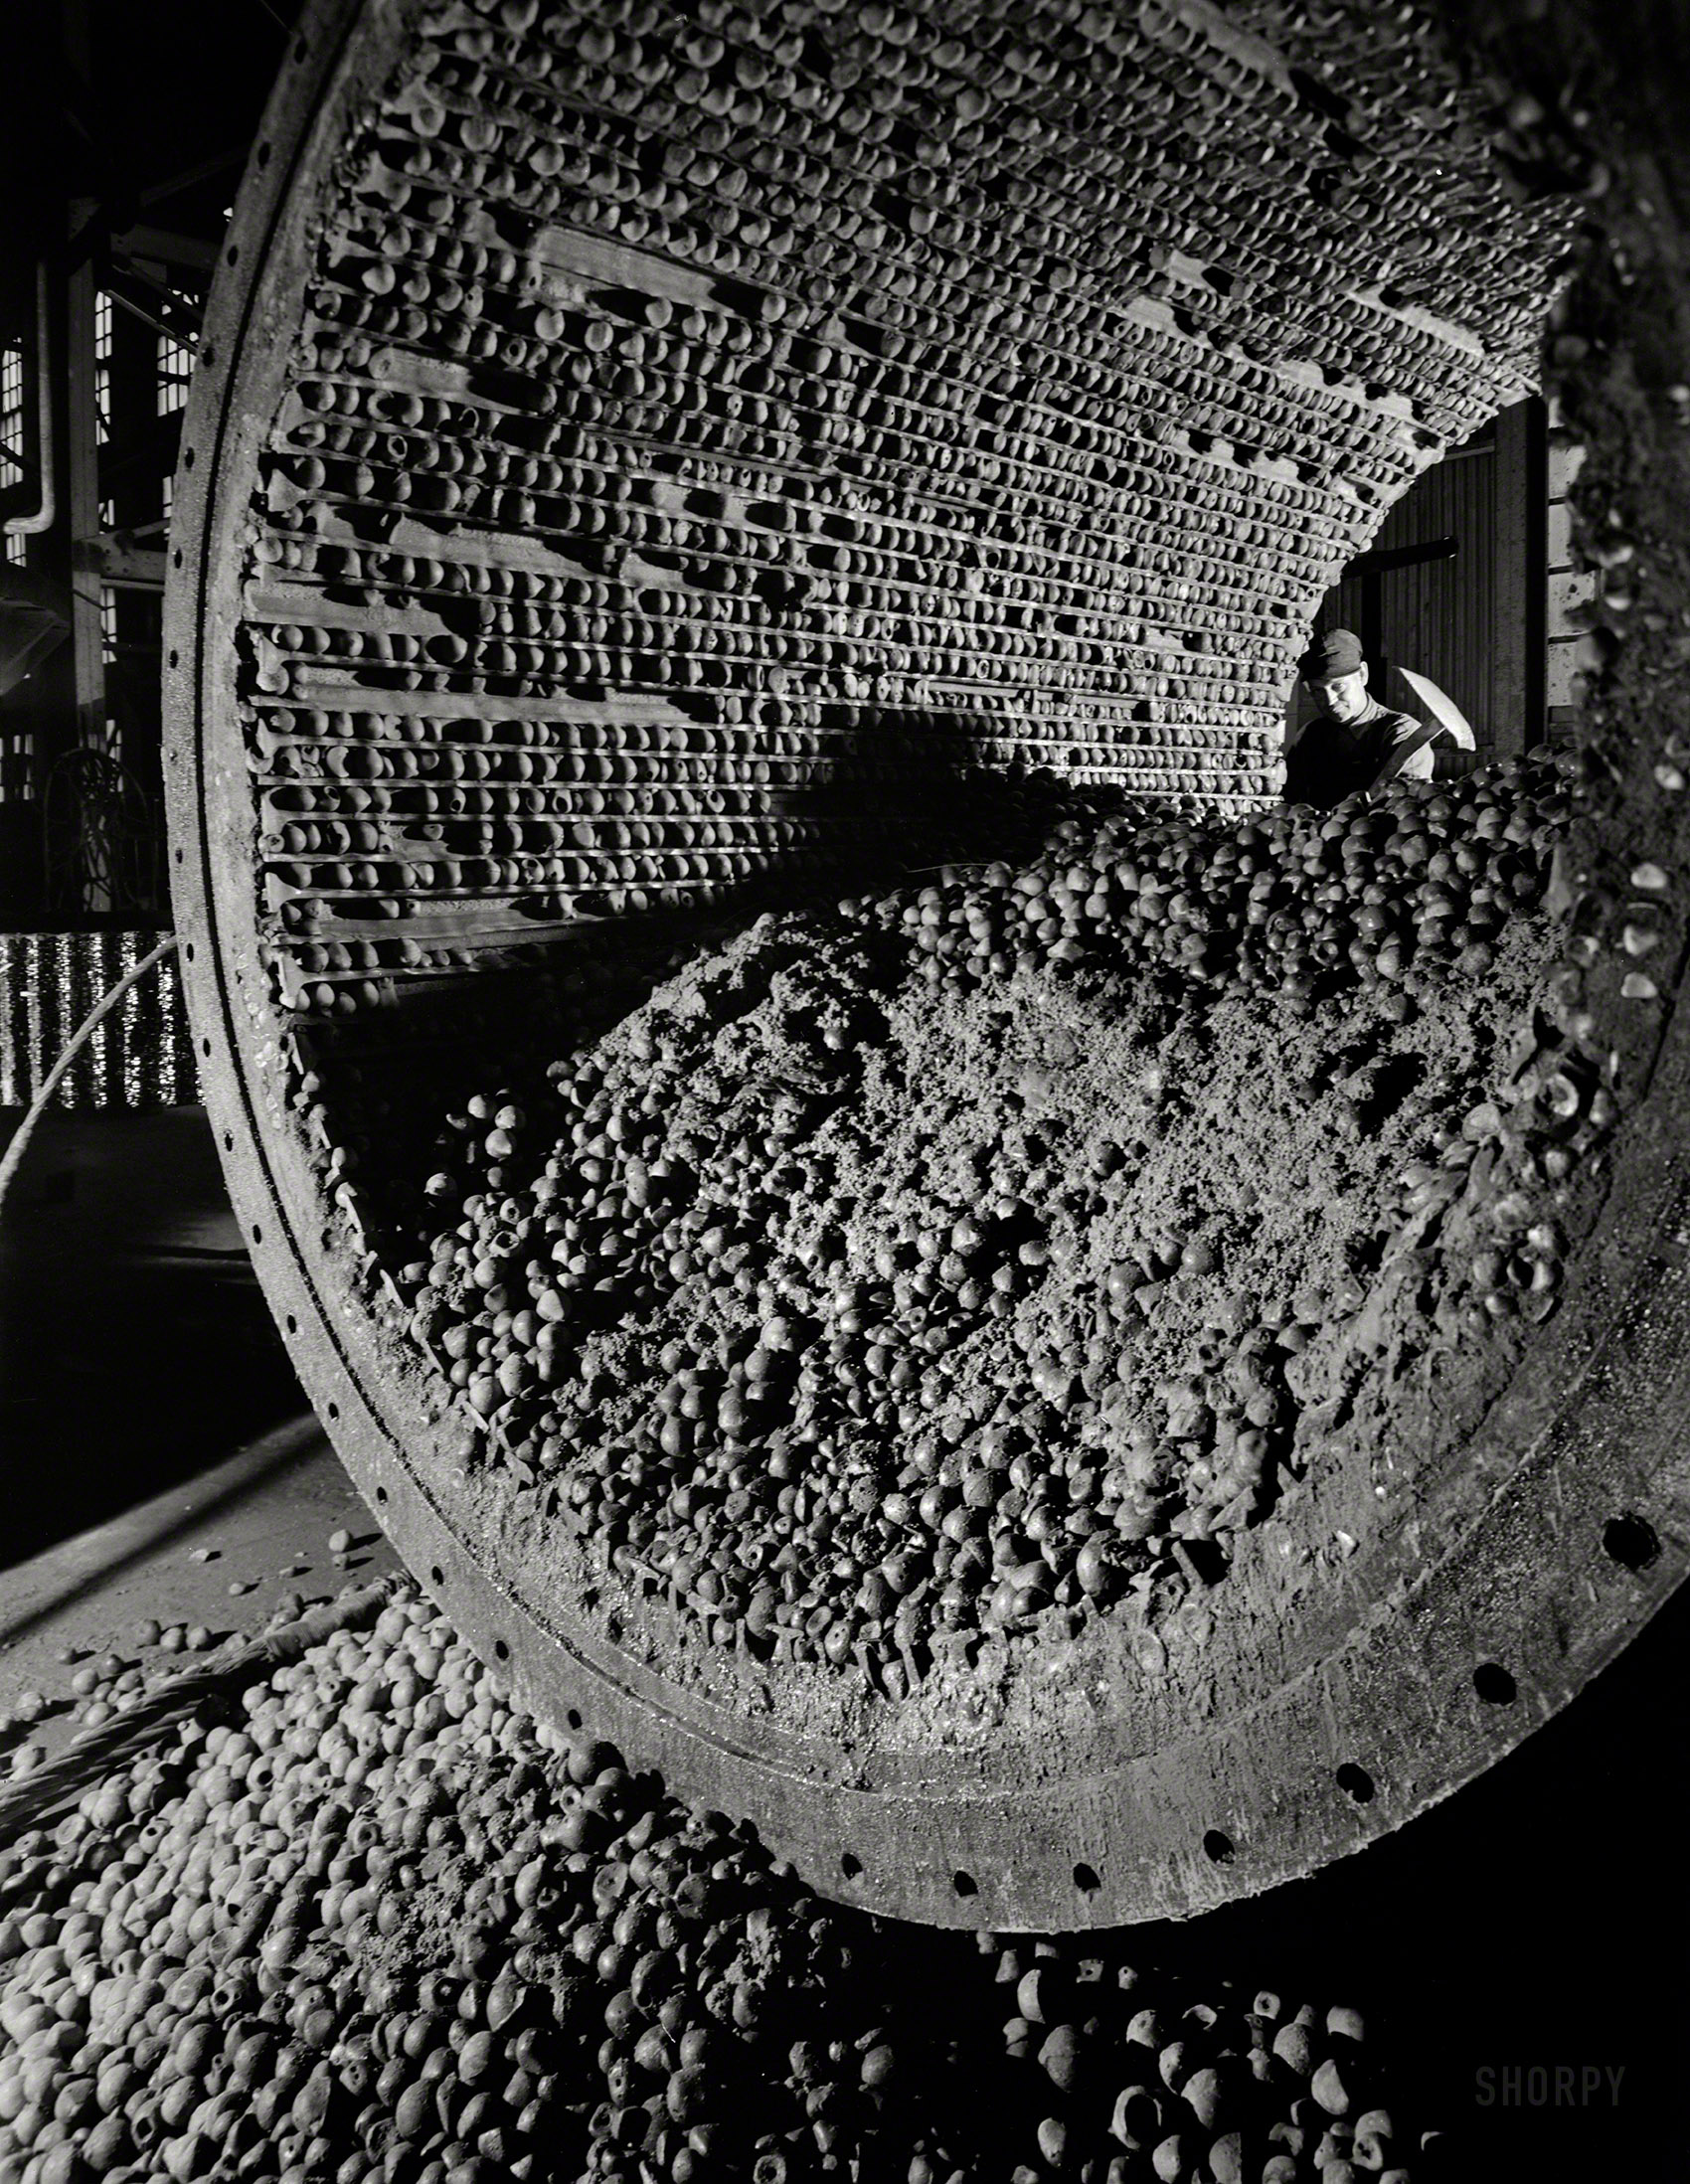 November 1942. "Production. Copper. Interior of large ball mill showing the iron balls which grind the ore to a fine size for subsequent treatment by flotation at one of the mills of the Utah Copper Company in Magna and Arthur." 4x5 nitrate negative by Andreas Feininger for the Office of War Information. View full size.